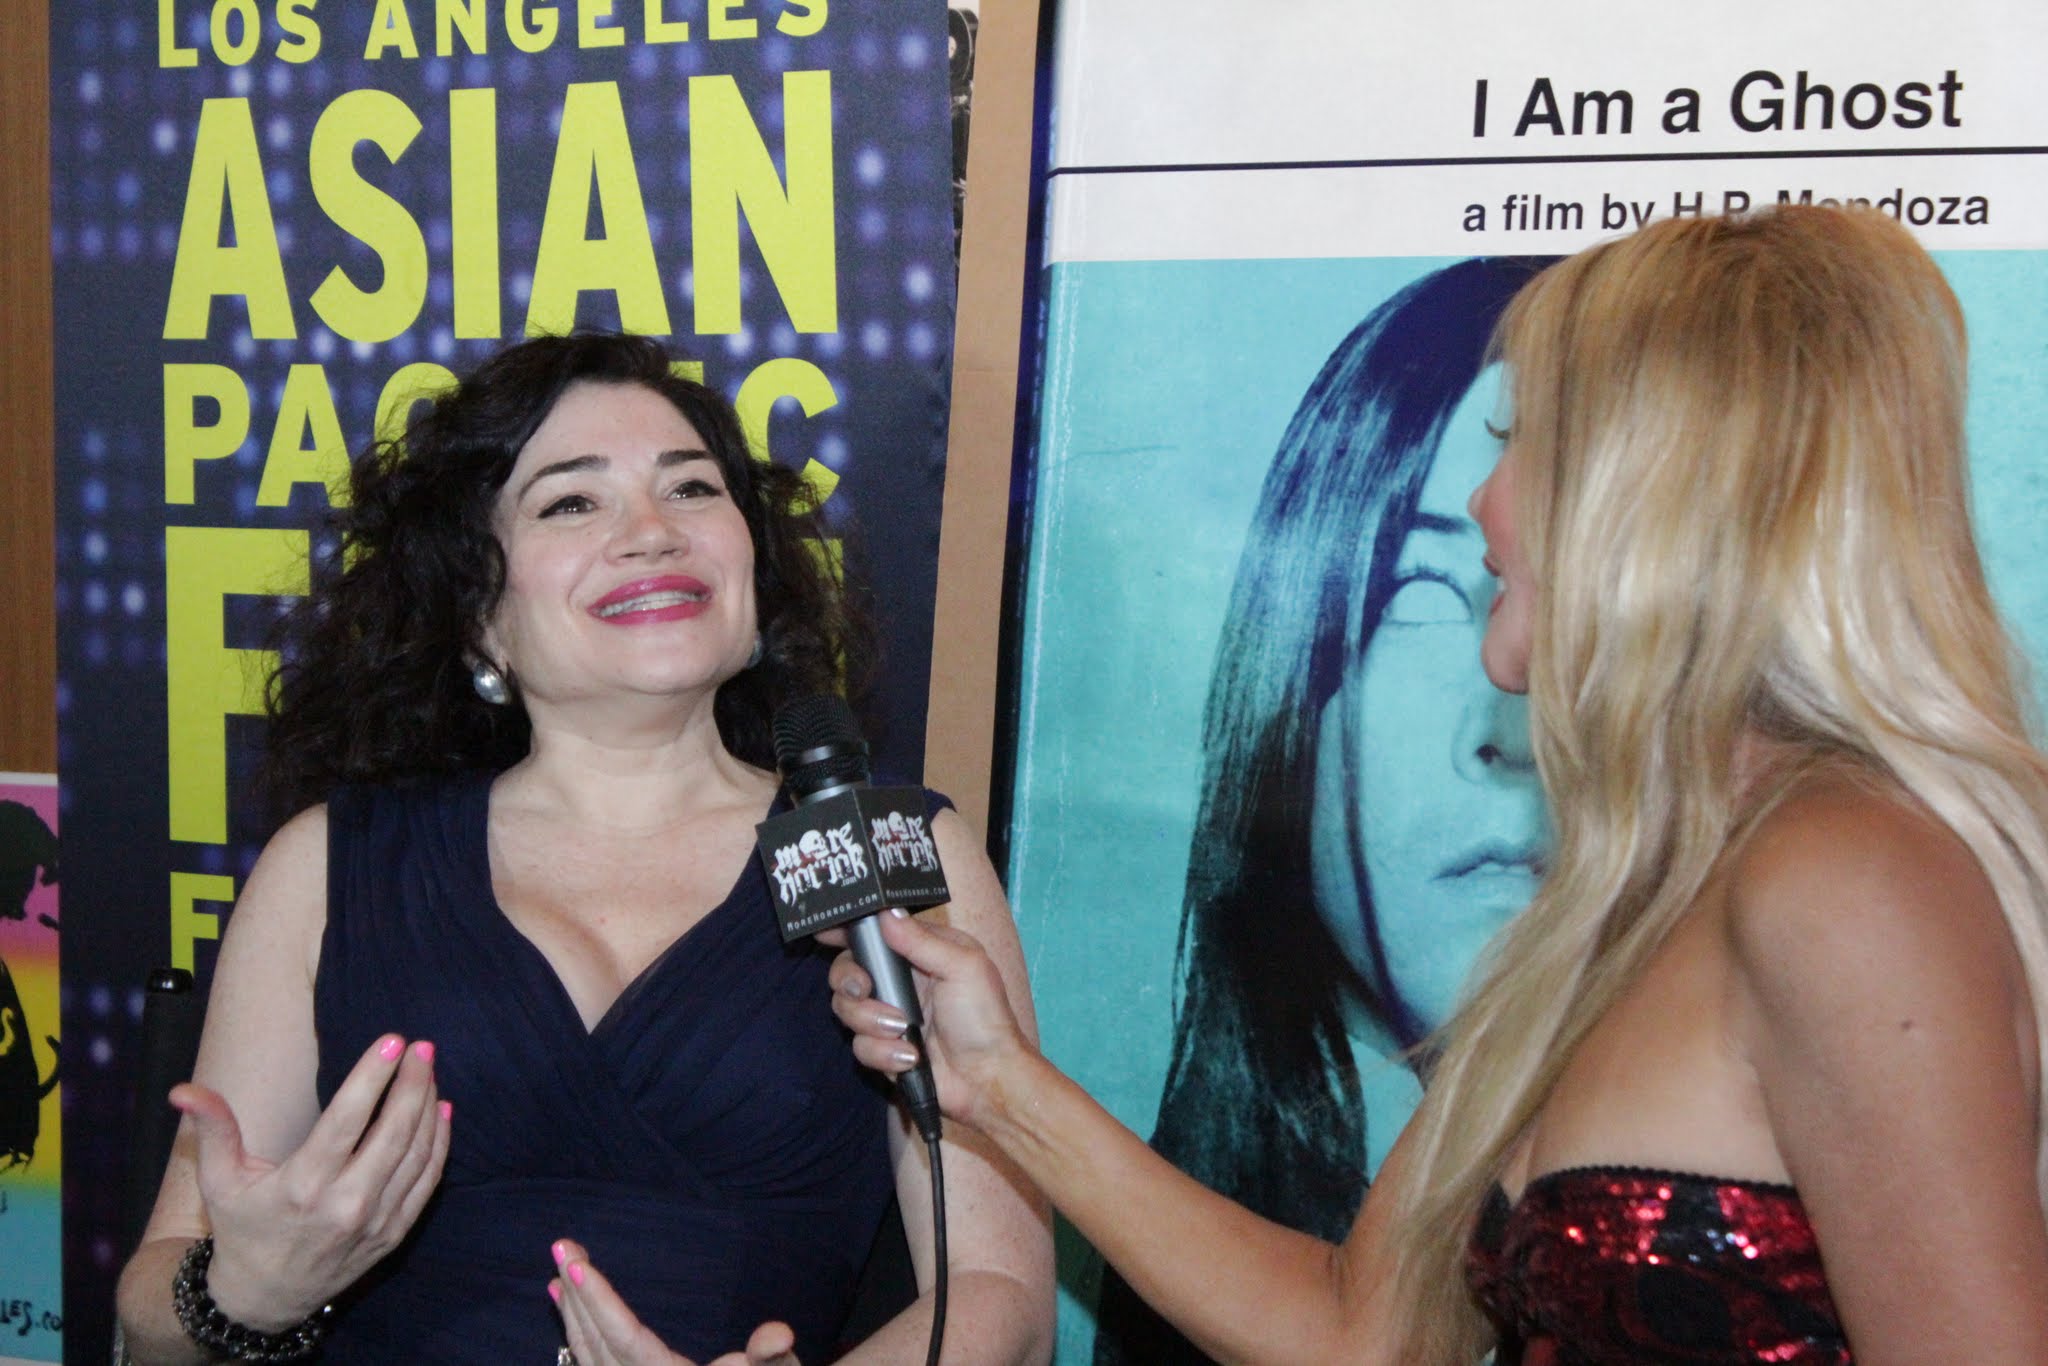 (L to R) Actress Karen-Eileen Gordon being interviewed by Dawna Lee Heising for MoreHorror.com and Eye On Entertainment, at the Los Angeles Asian Pacific Film Festival (Directors Guild of America)